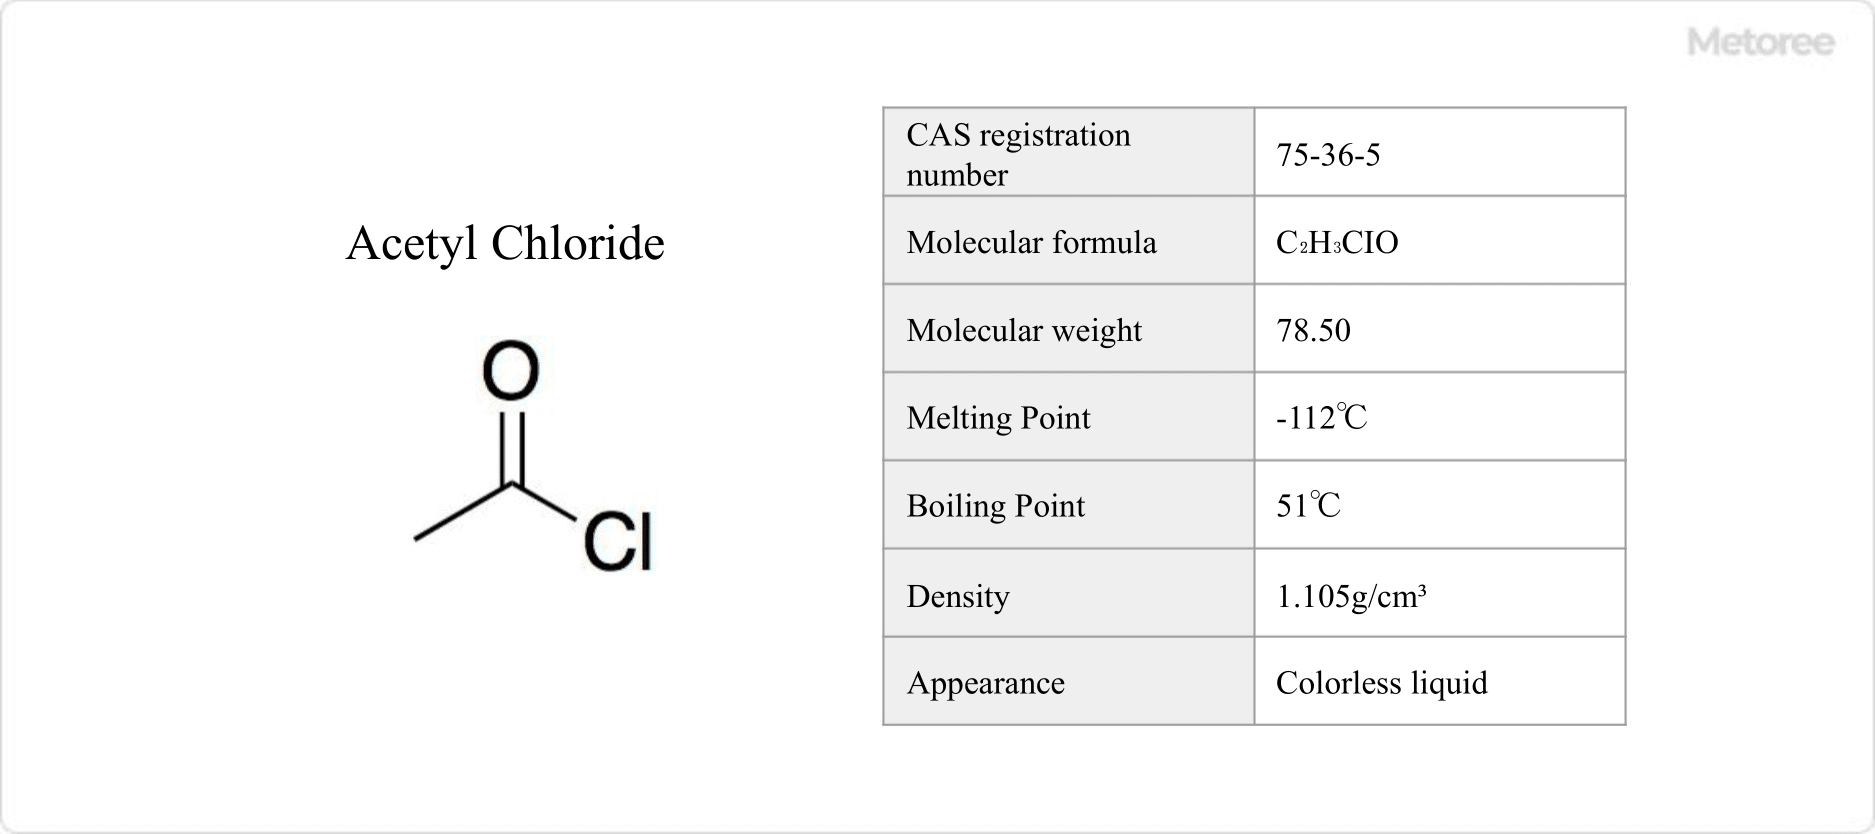 Figure 1. Basic Information on Acetyl Chloride